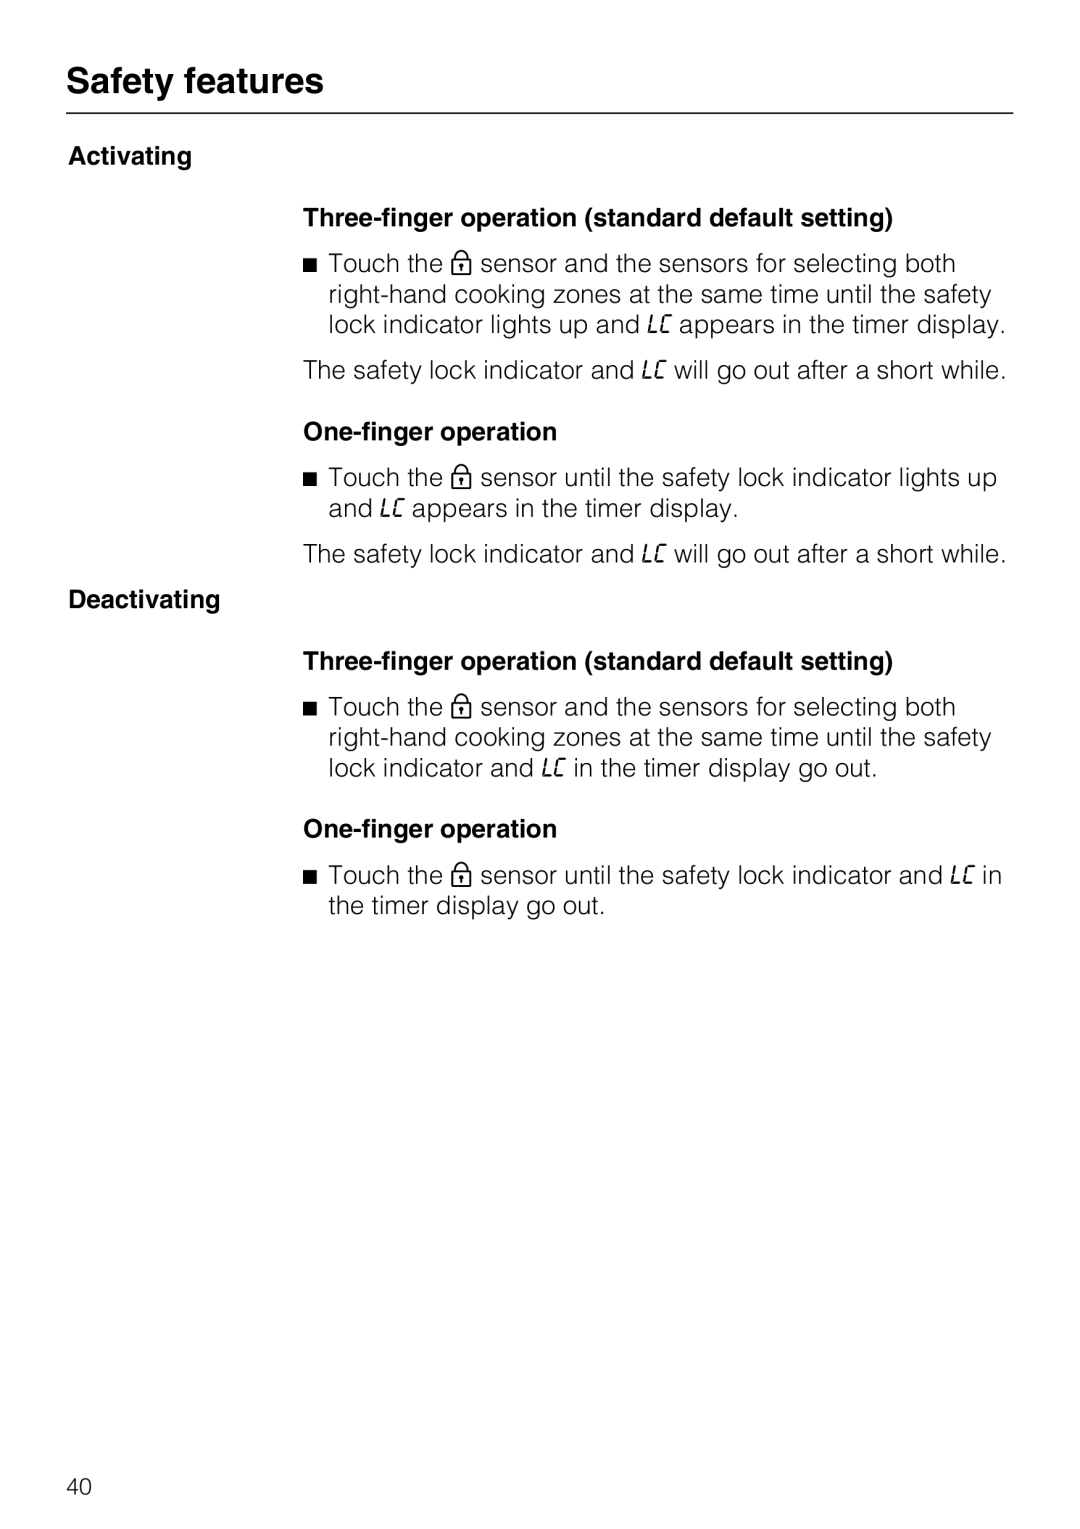 Miele KM6323, KM6347 Safety features, Activating Three-finger operation standard default setting, One-finger operation 